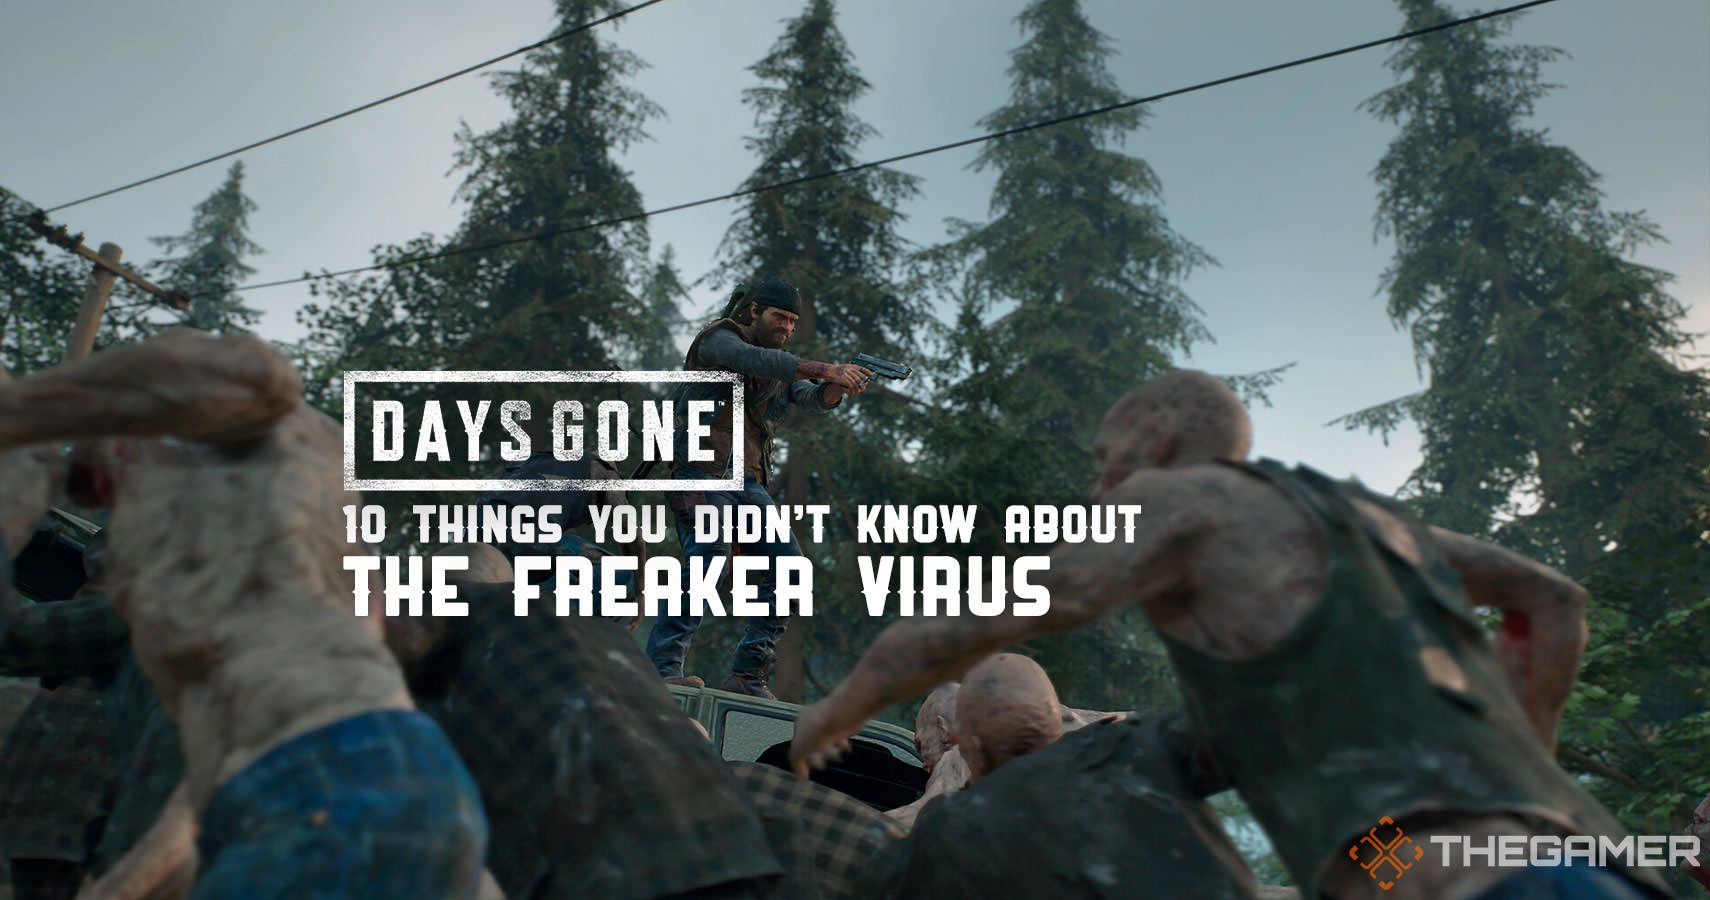 Days Gone' Is Interesting But Impossible to Take Seriously